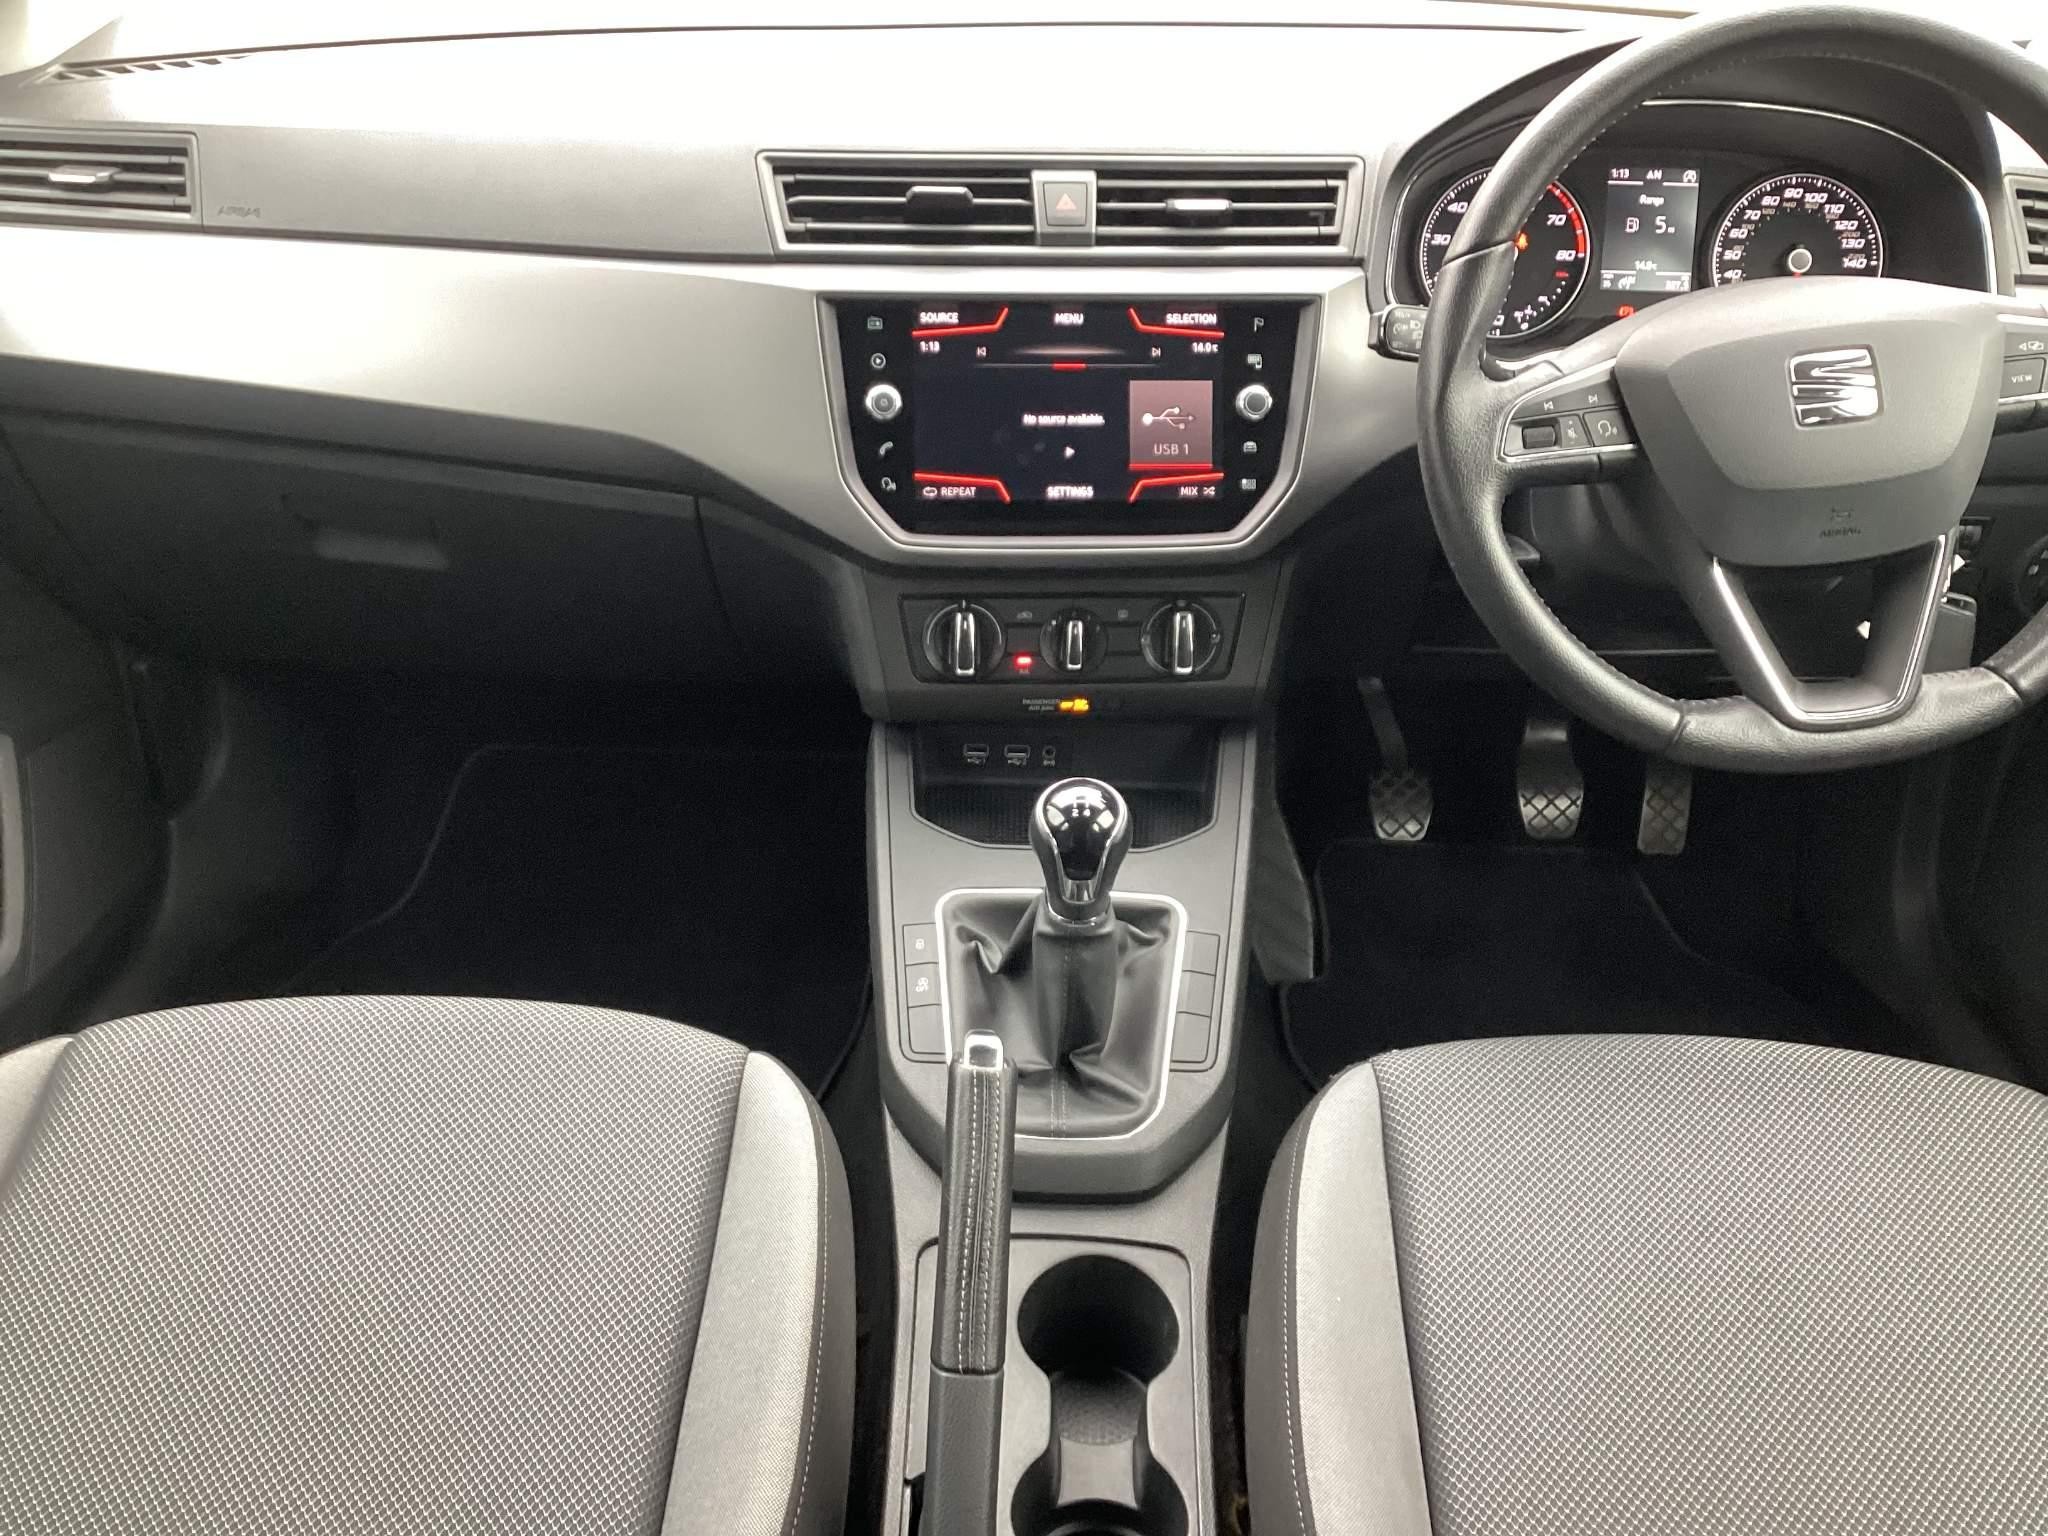 SEAT Ibiza Interior, Technology and Practicality